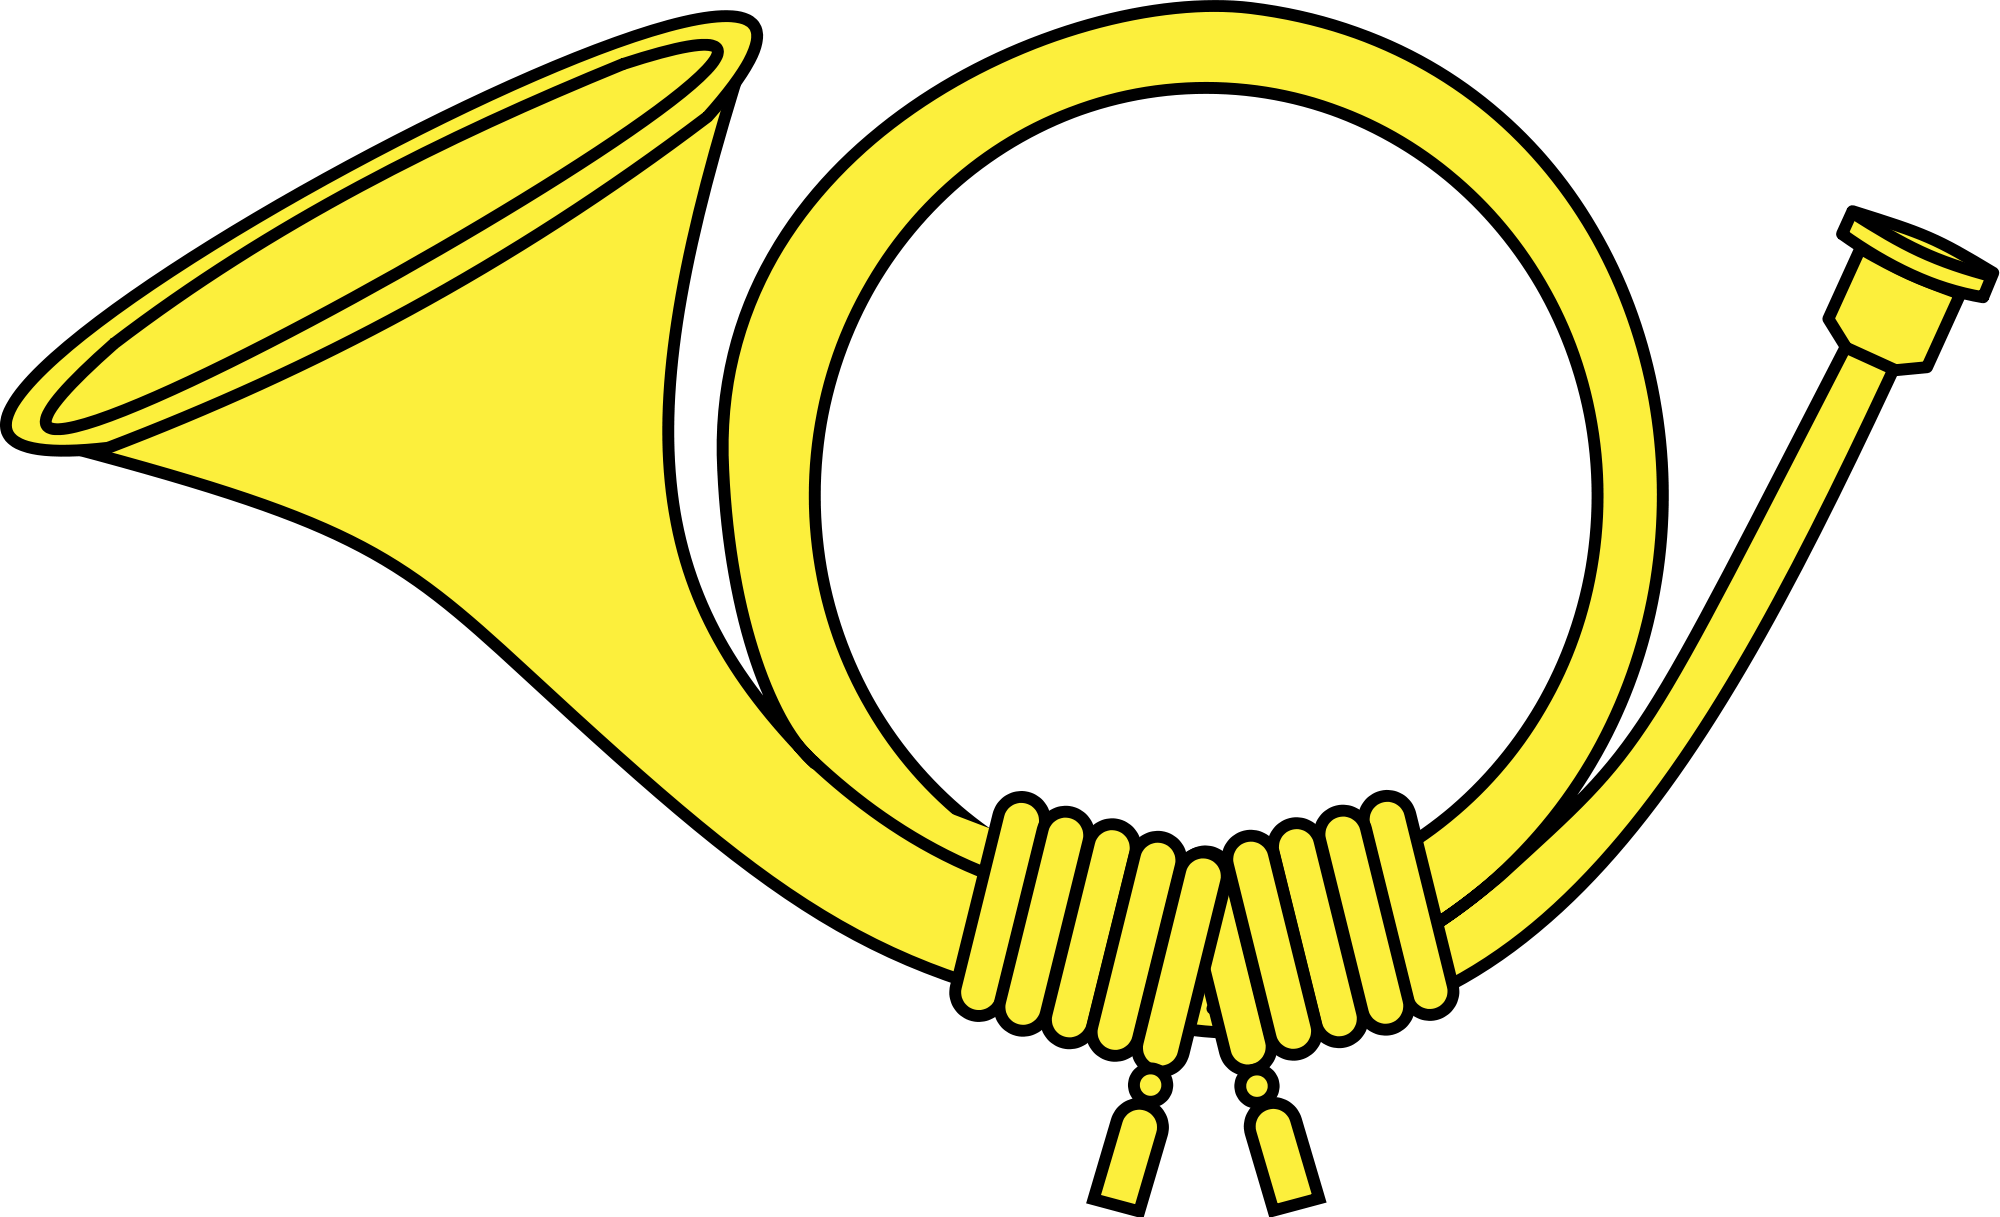 Post Horn French Horns Cor De Chasse Clip Art - Ajman University Of Science And Technology (2000x1217)